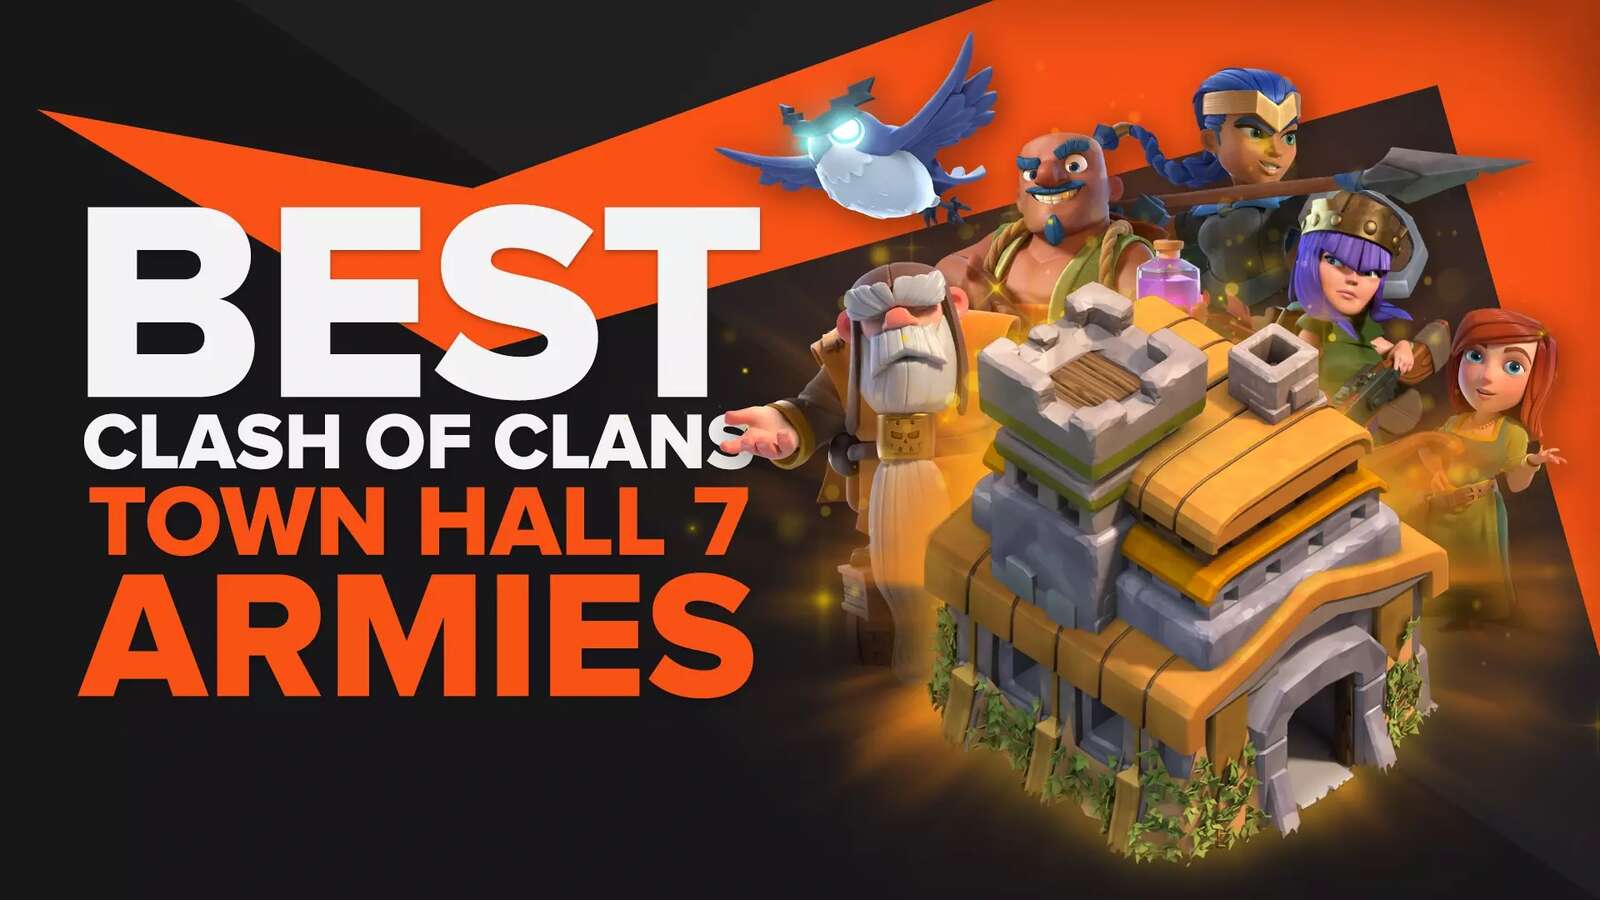 What Is The Best Army In Clash of Clans For Town Hall 7?